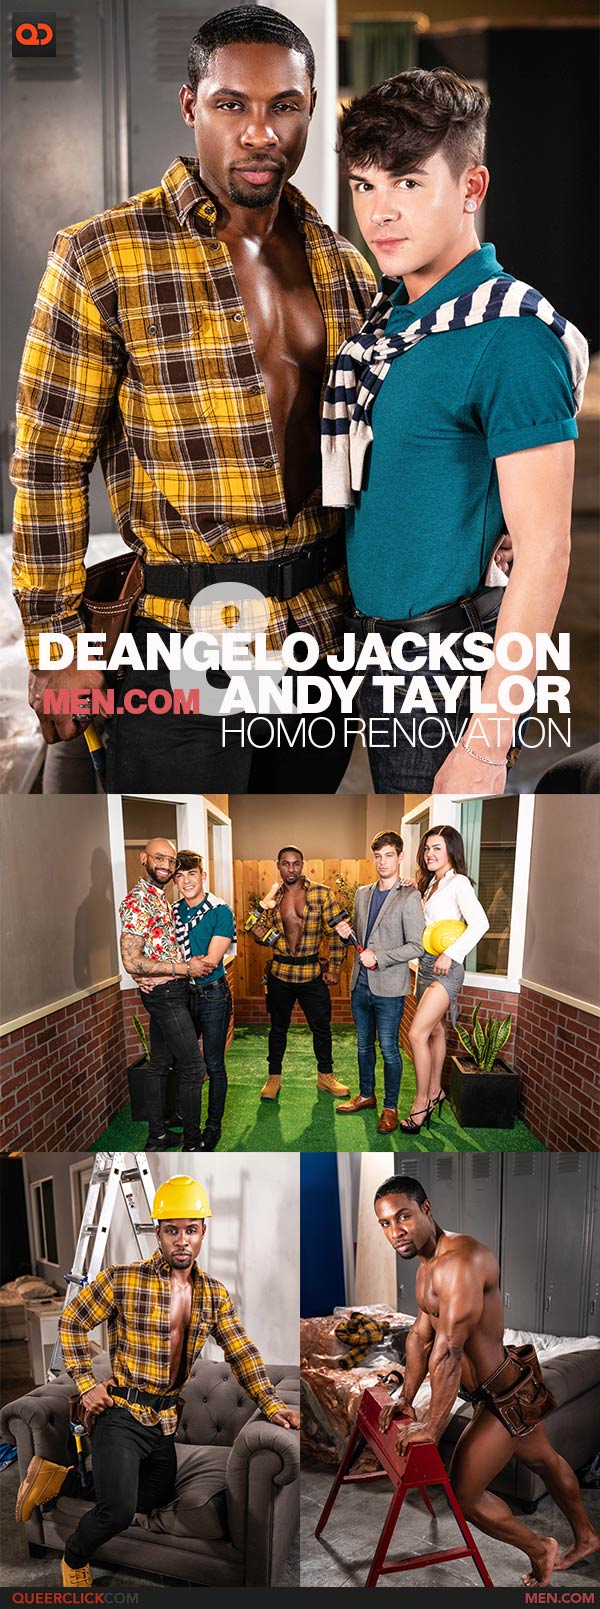 Men.com: DeAngelo Jackson and Andy Taylor